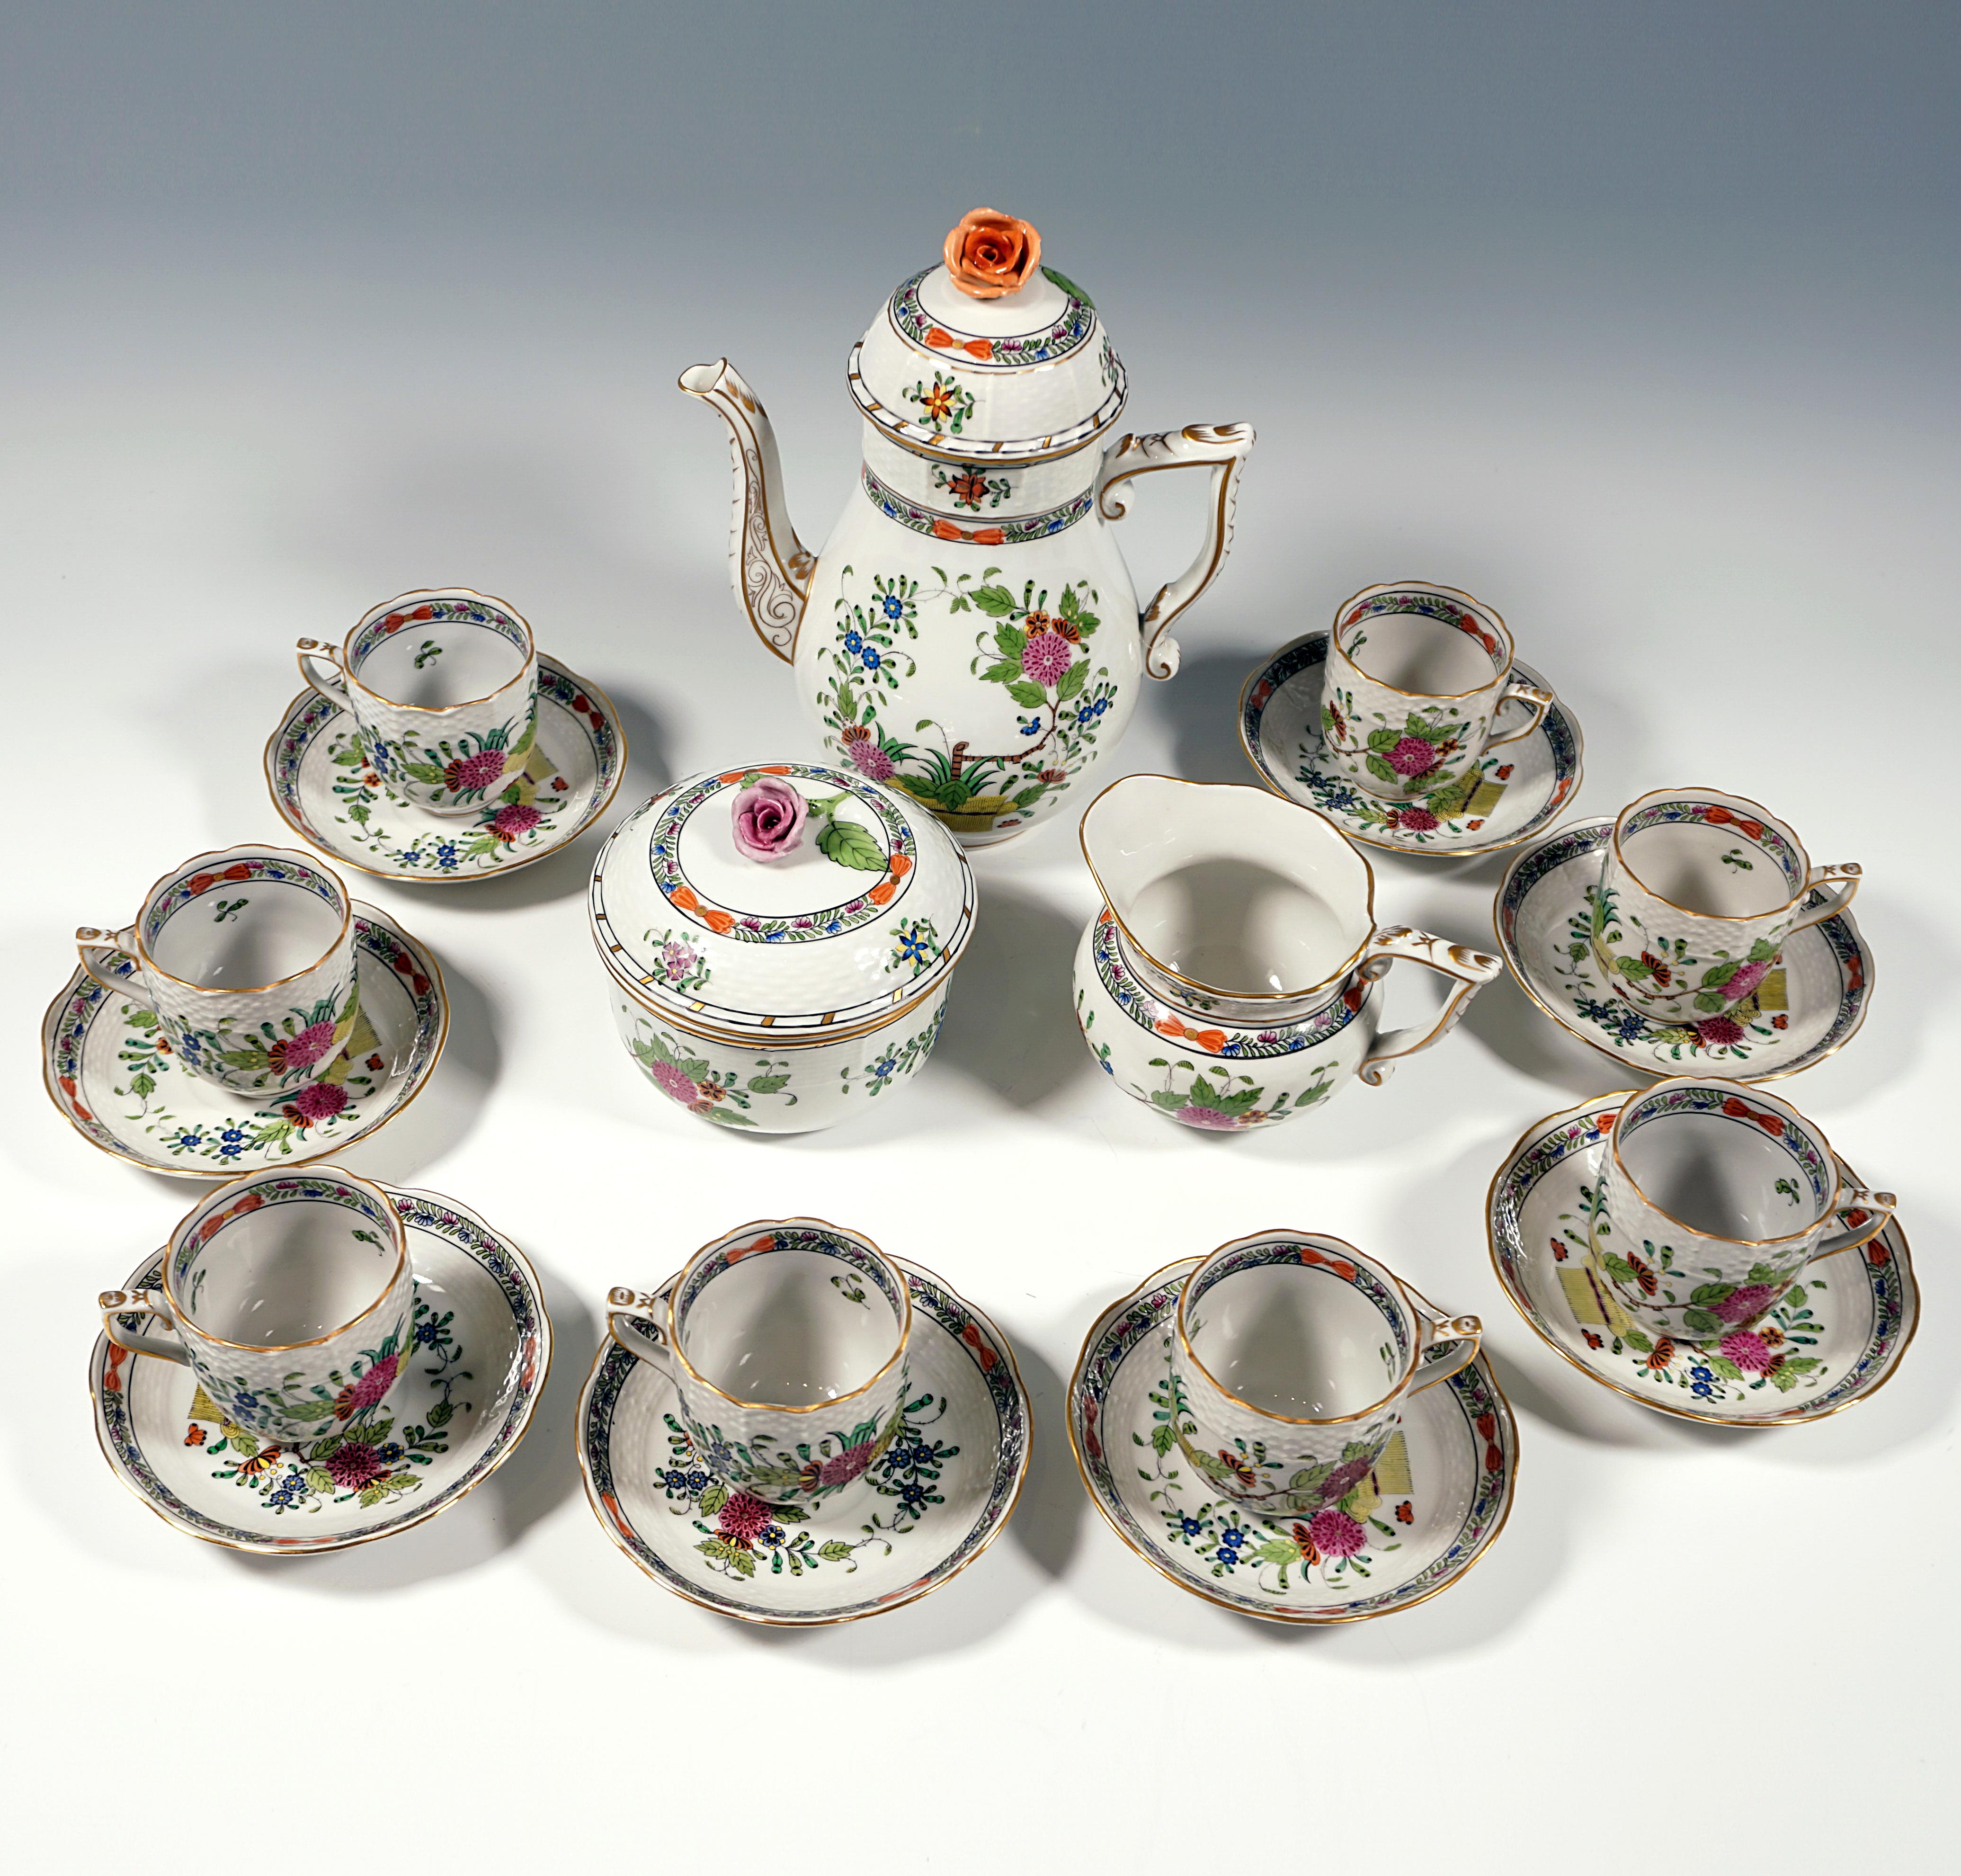 Herend service consisting of 19 parts: coffee pot with lid, milk jug, sugar bowl, eight cups, eight saucers.
Shape: Osier / basket weave, model number 612
Decor: FD - Fleurs des Indes / Indian Basket - richly colored floral decoration with gold